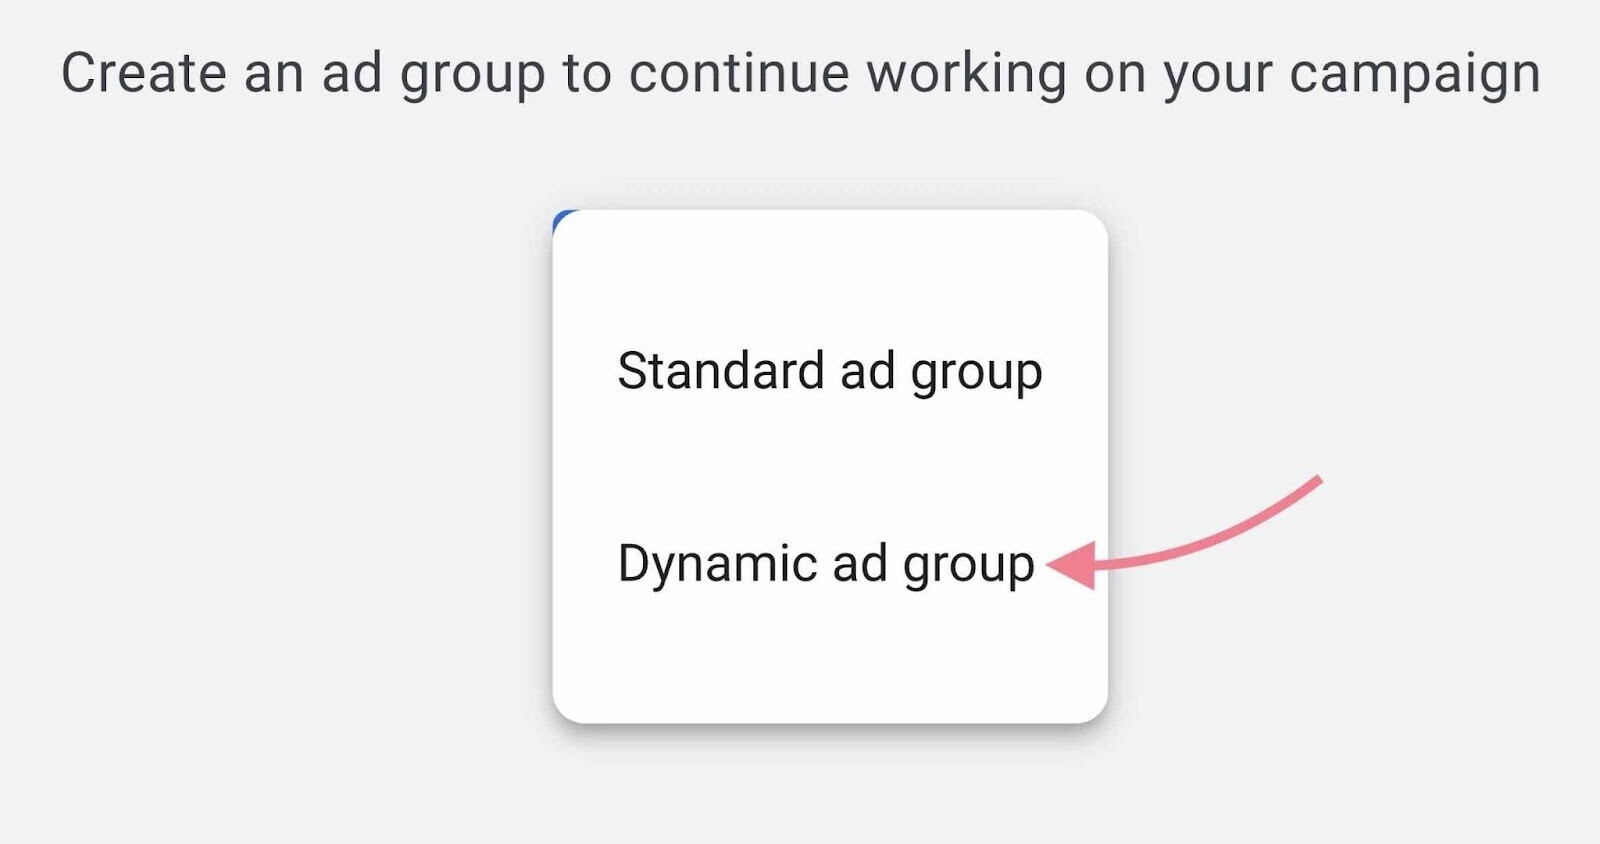 Dynamic ad group